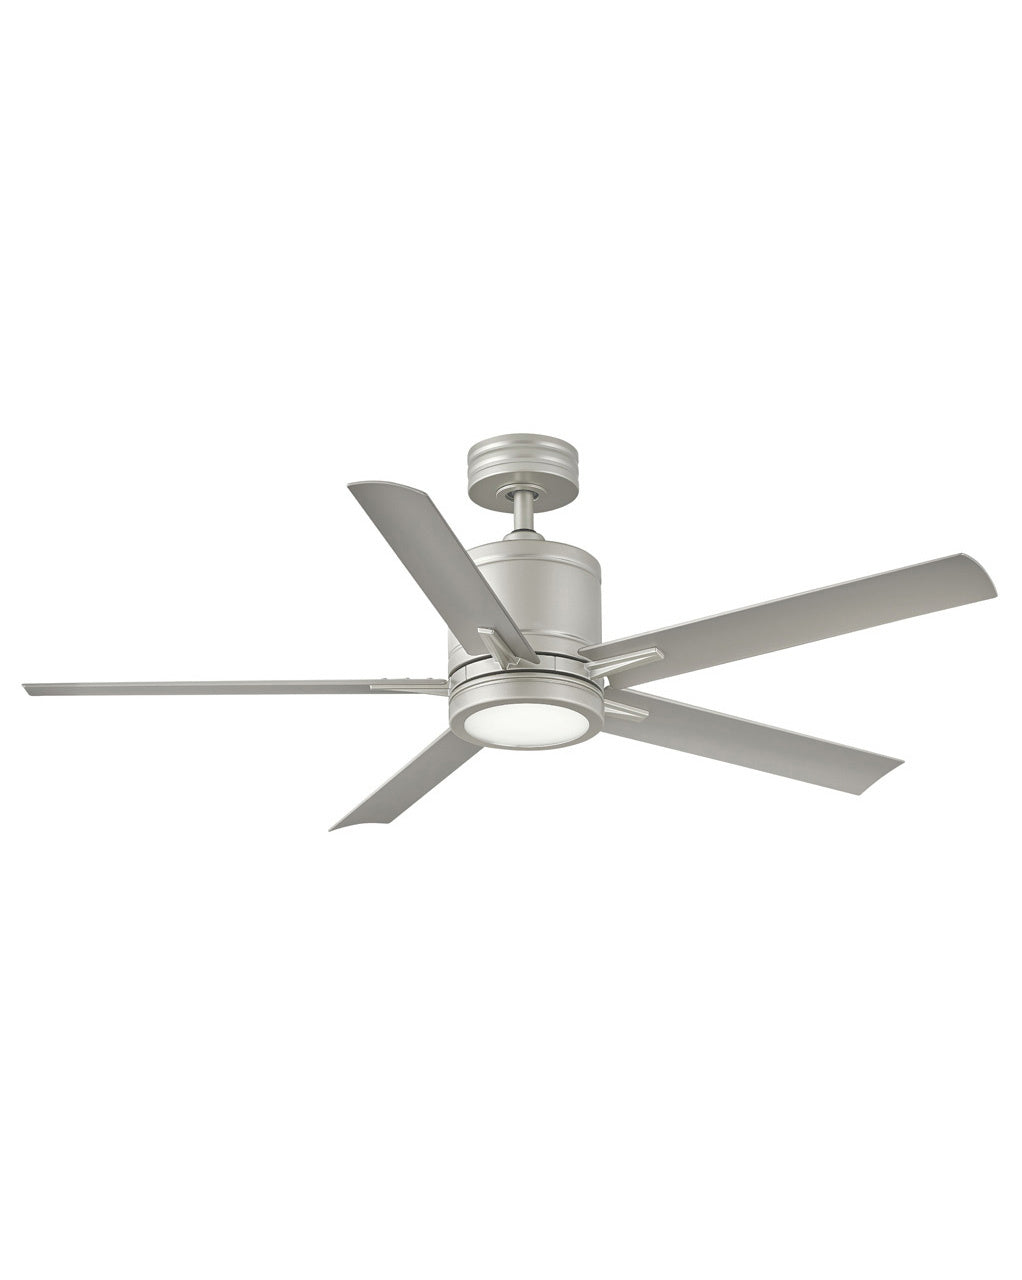 "Hinkley Canada - 52"Ceiling Fan - Vail - Brushed Nickel- Union Lighting Luminaires Decor"